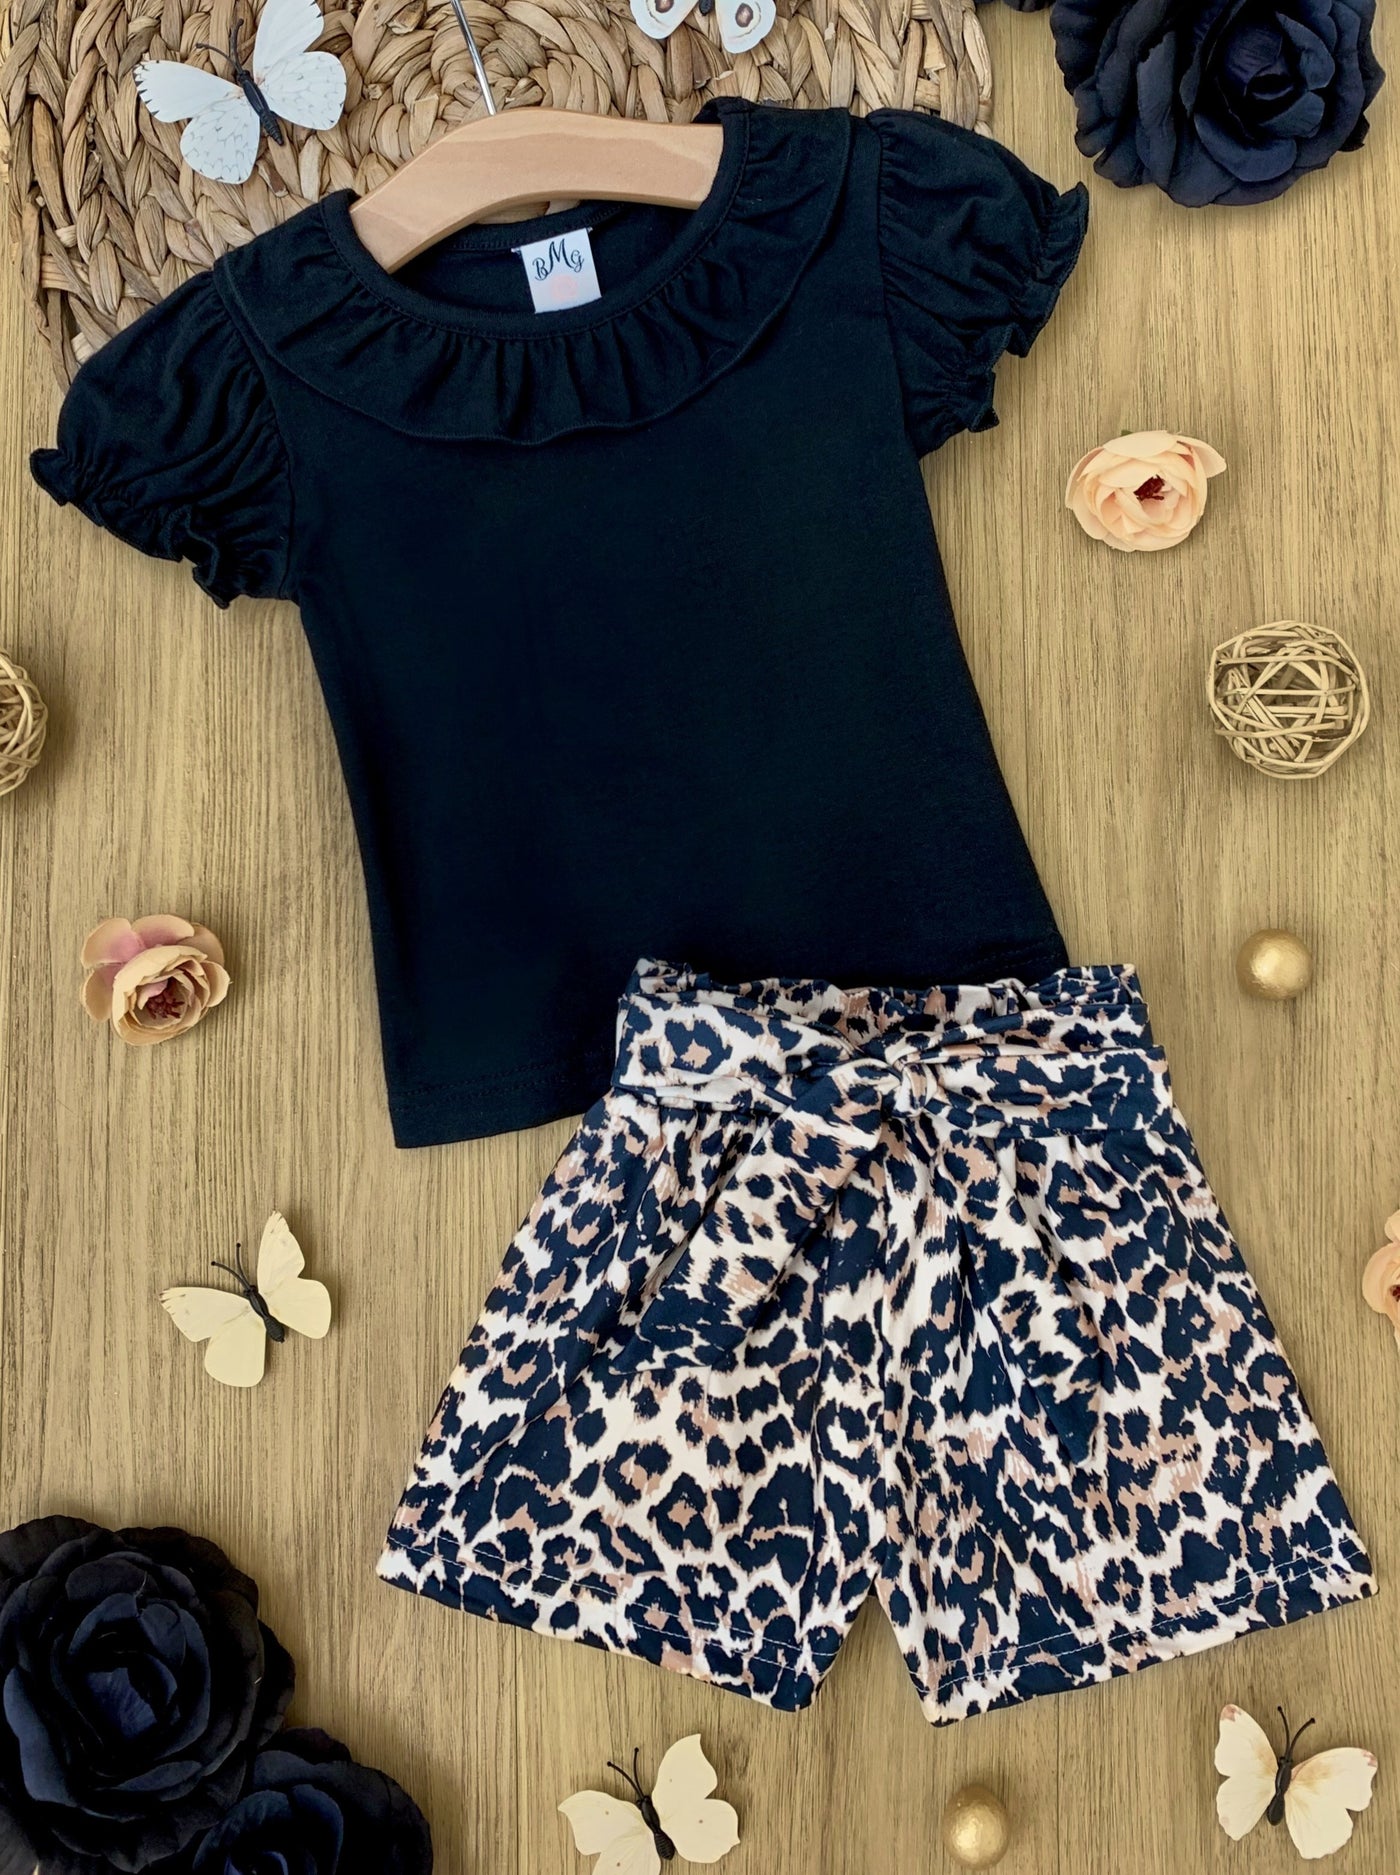 girls set features a black top with a bib and ruffled short sleeves and leopard printed shorts with a sash